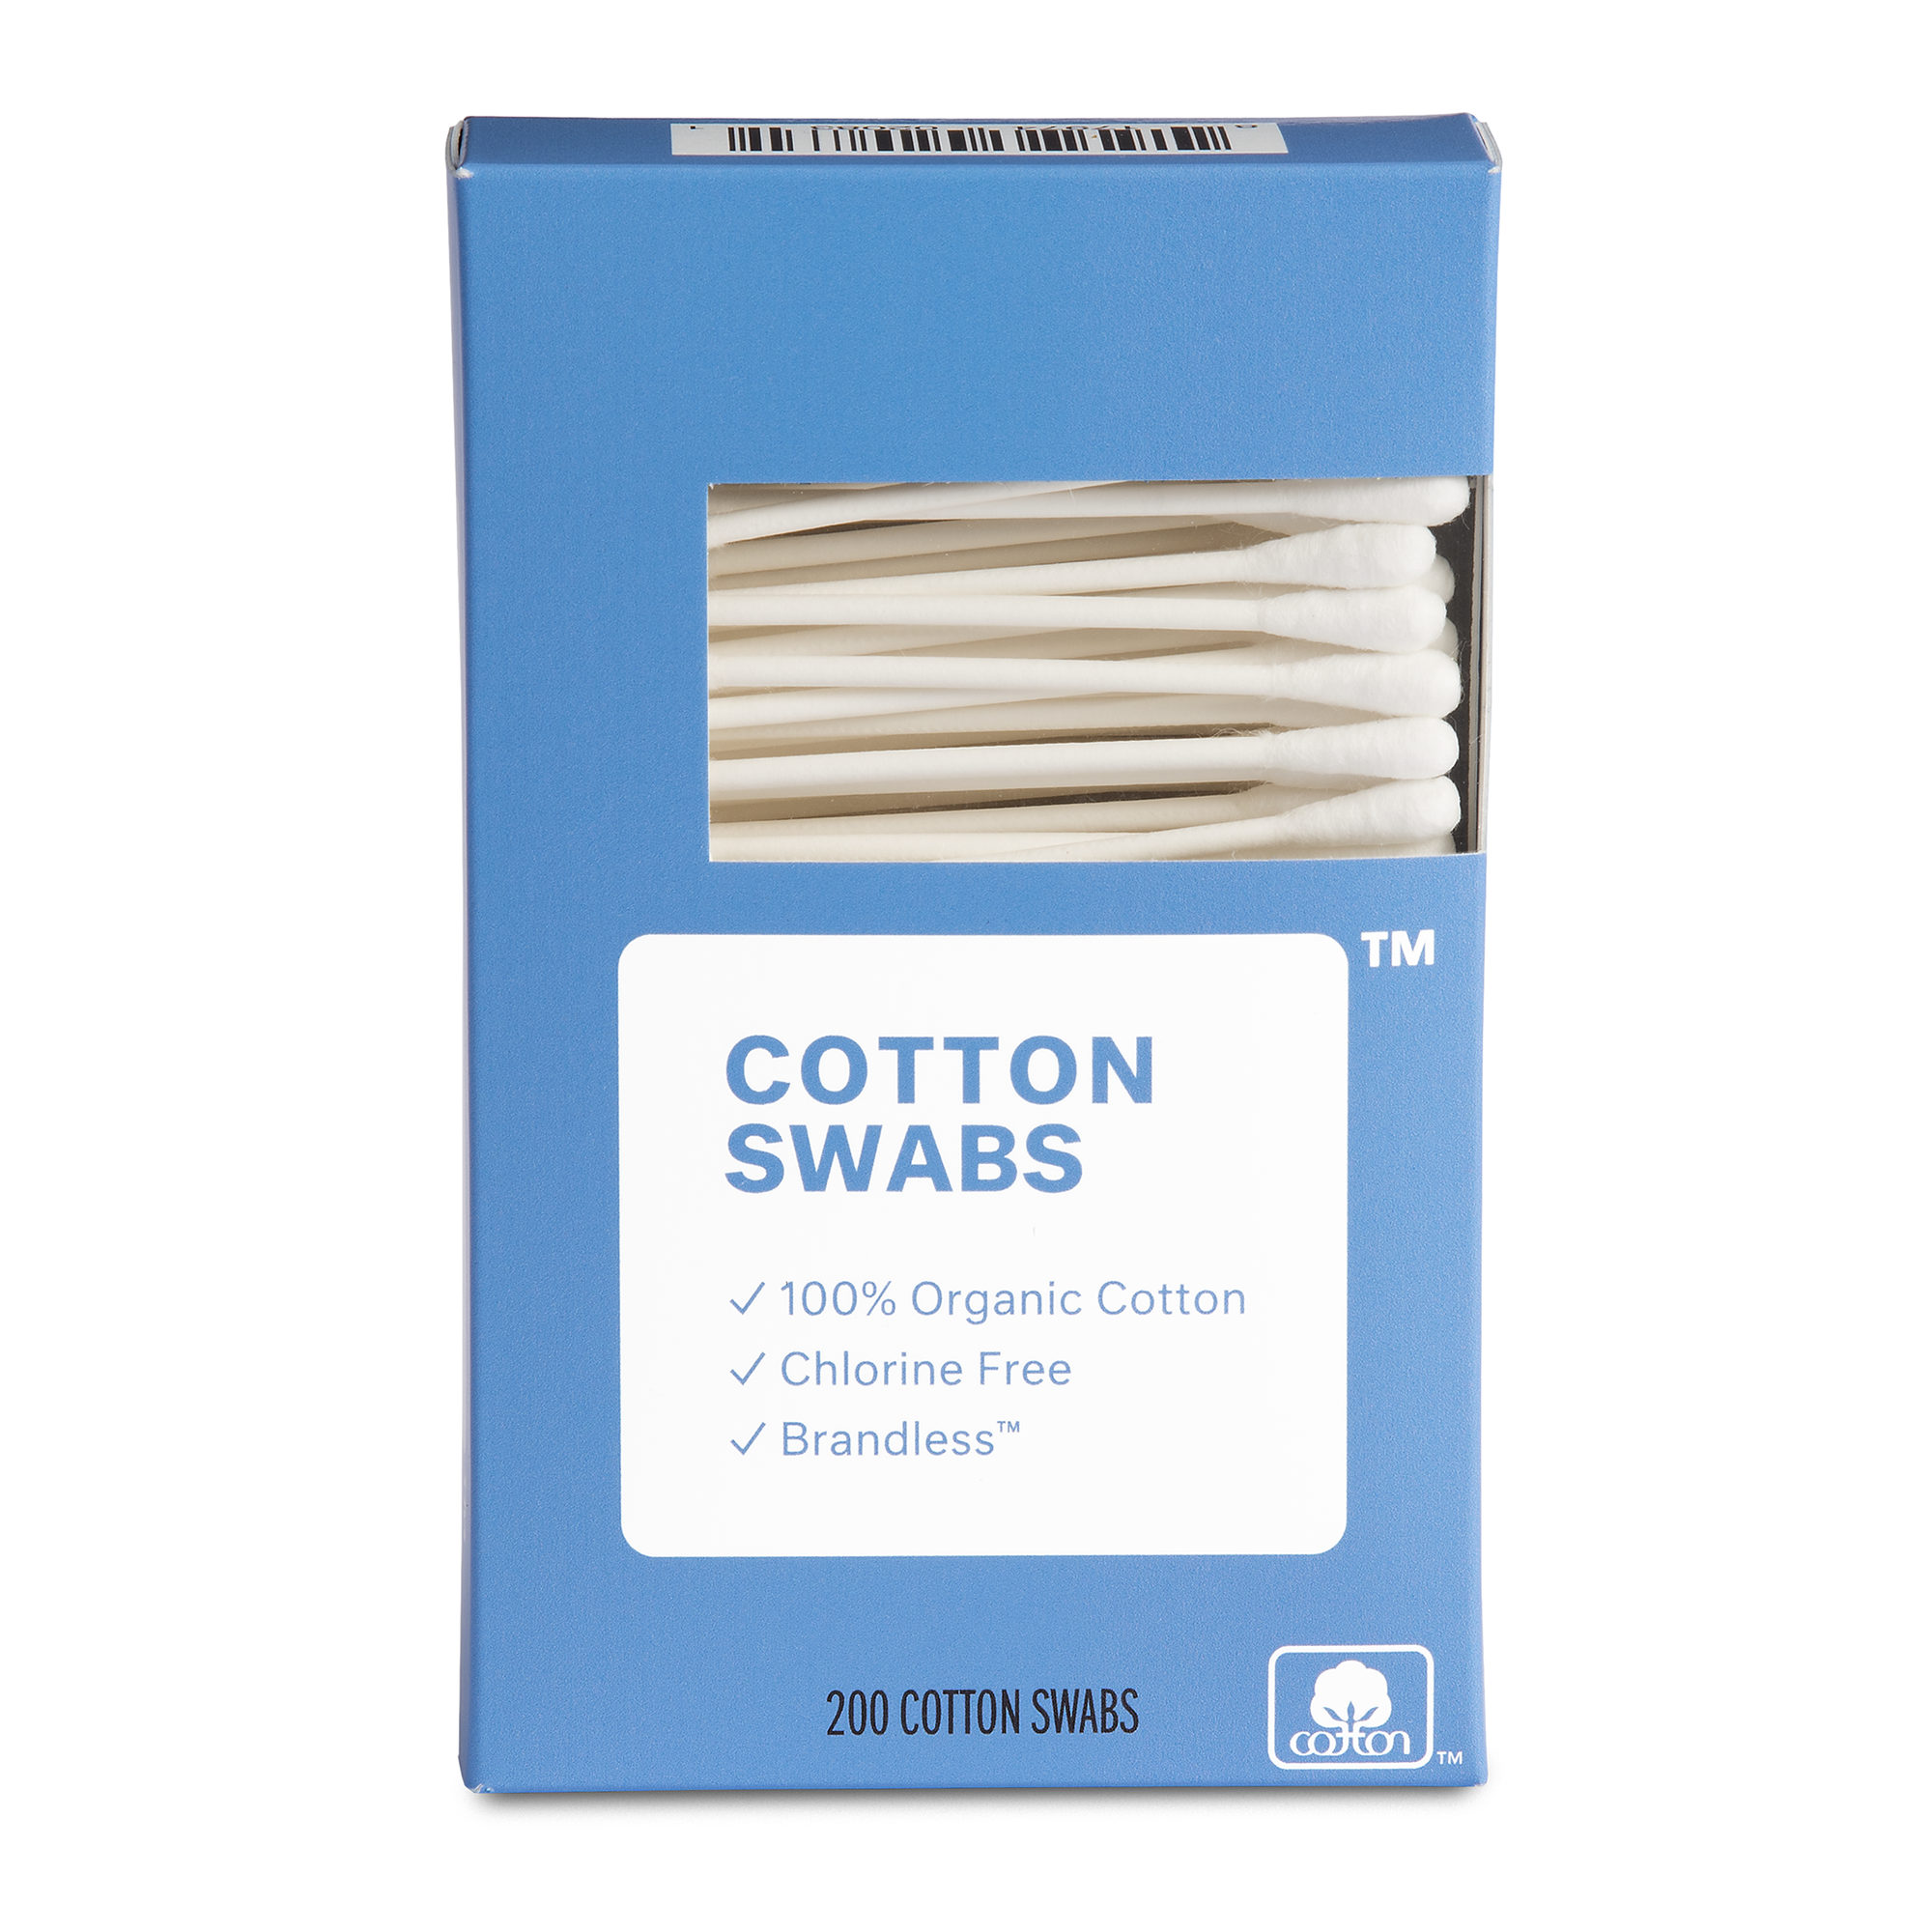 Cotton Swabs. 100% organic cotton. double tipped. chlorine bleach free. hypoallergenic. Brandless. 200 Cotton Swabs.